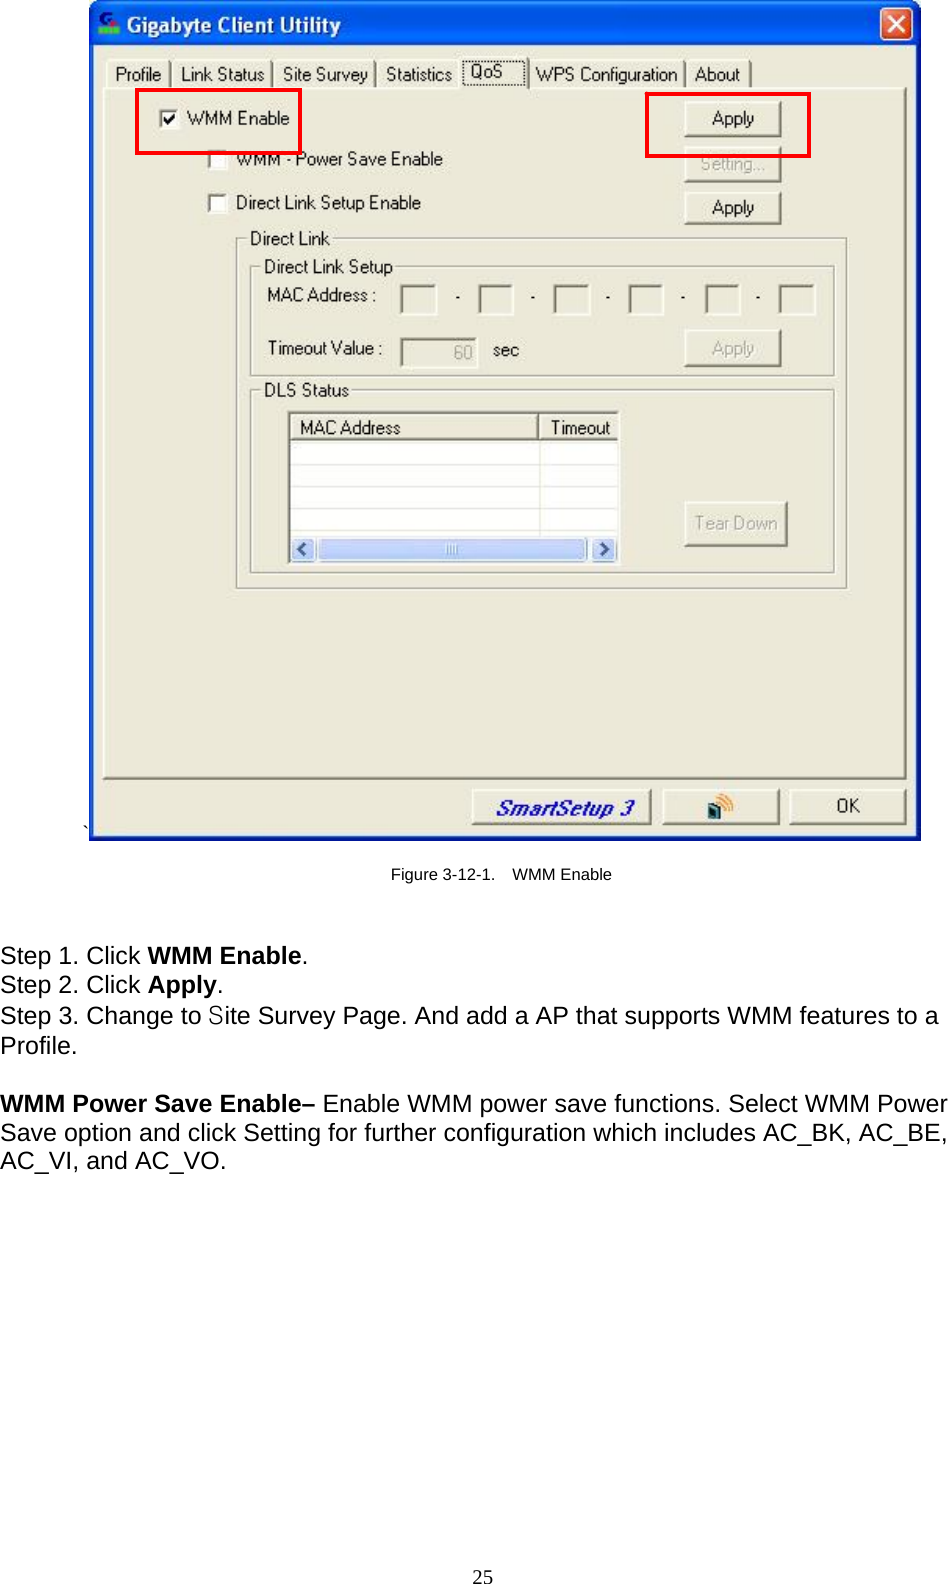 25   `  Figure 3-12-1.    WMM Enable   Step 1. Click WMM Enable.  Step 2. Click Apply. Step 3. Change to Site Survey Page. And add a AP that supports WMM features to a Profile.  WMM Power Save Enable– Enable WMM power save functions. Select WMM Power Save option and click Setting for further configuration which includes AC_BK, AC_BE, AC_VI, and AC_VO.  